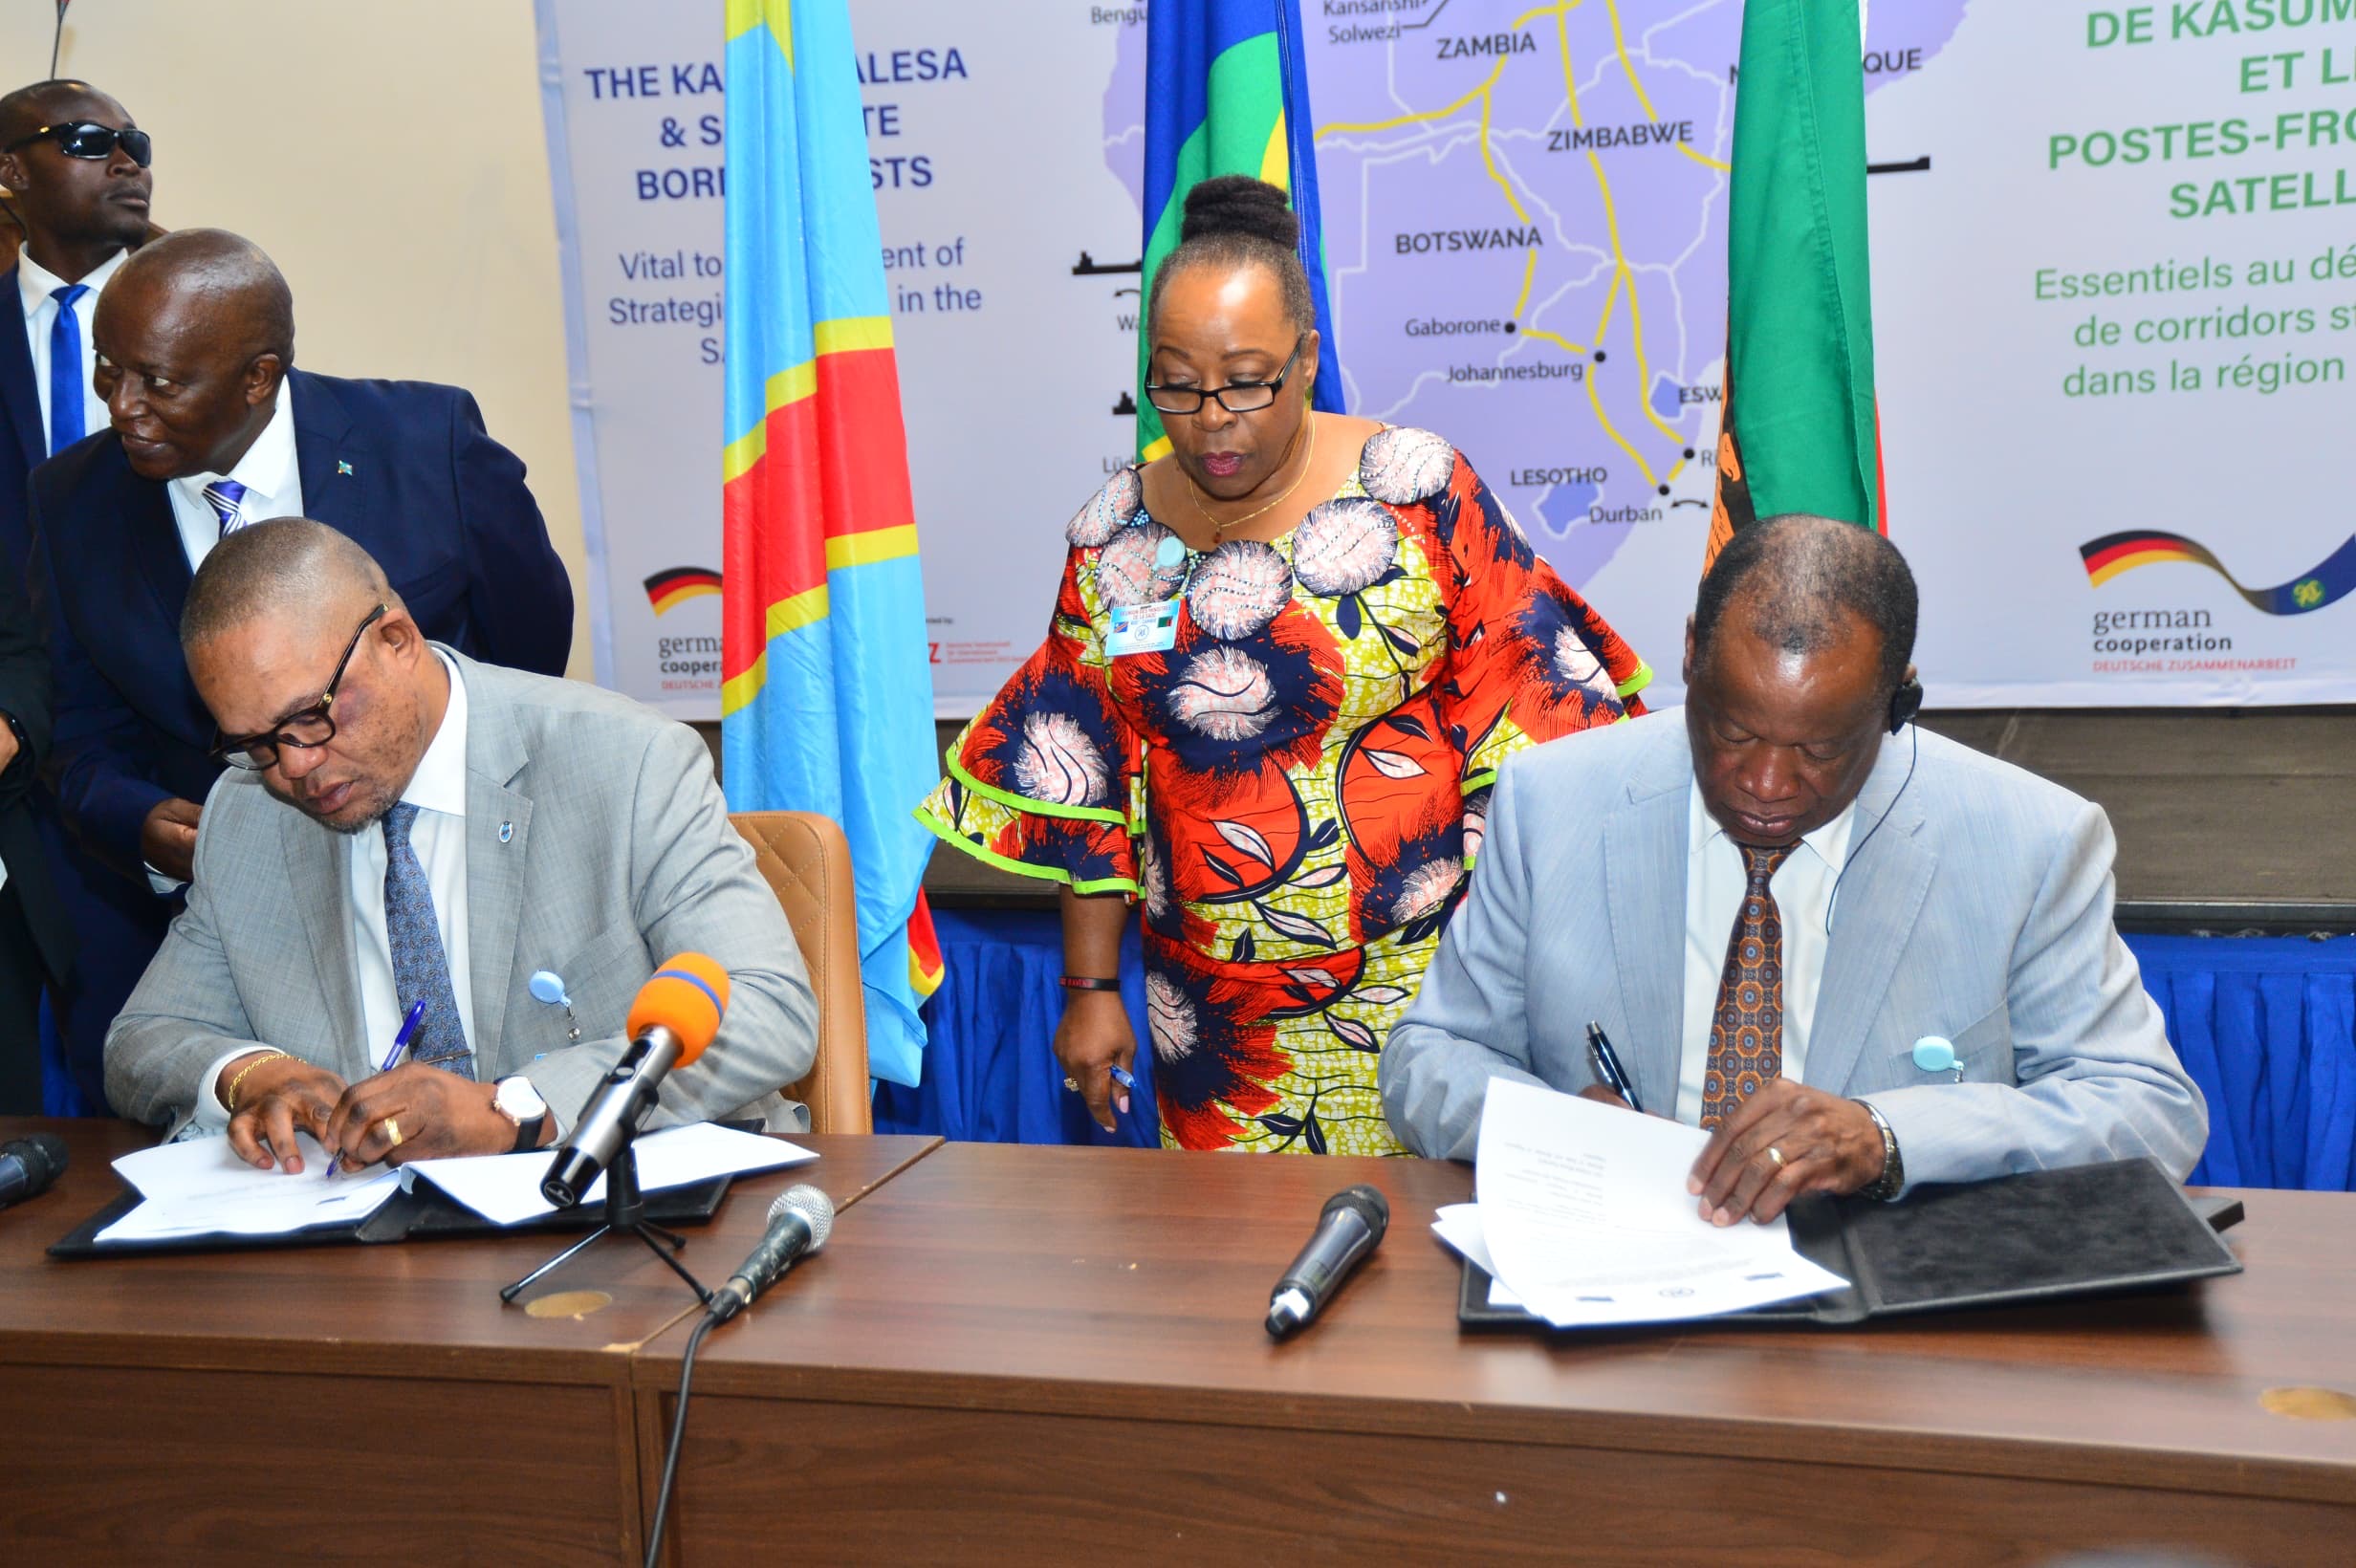 The Meeting produced an Outcome Statement as a significant commitment to address the challenges faced at the border post and as a step towards that shared vision by both the DRC and Zambia to enhance regional competitiveness. Both parties are signatories to the Outcome Statement.